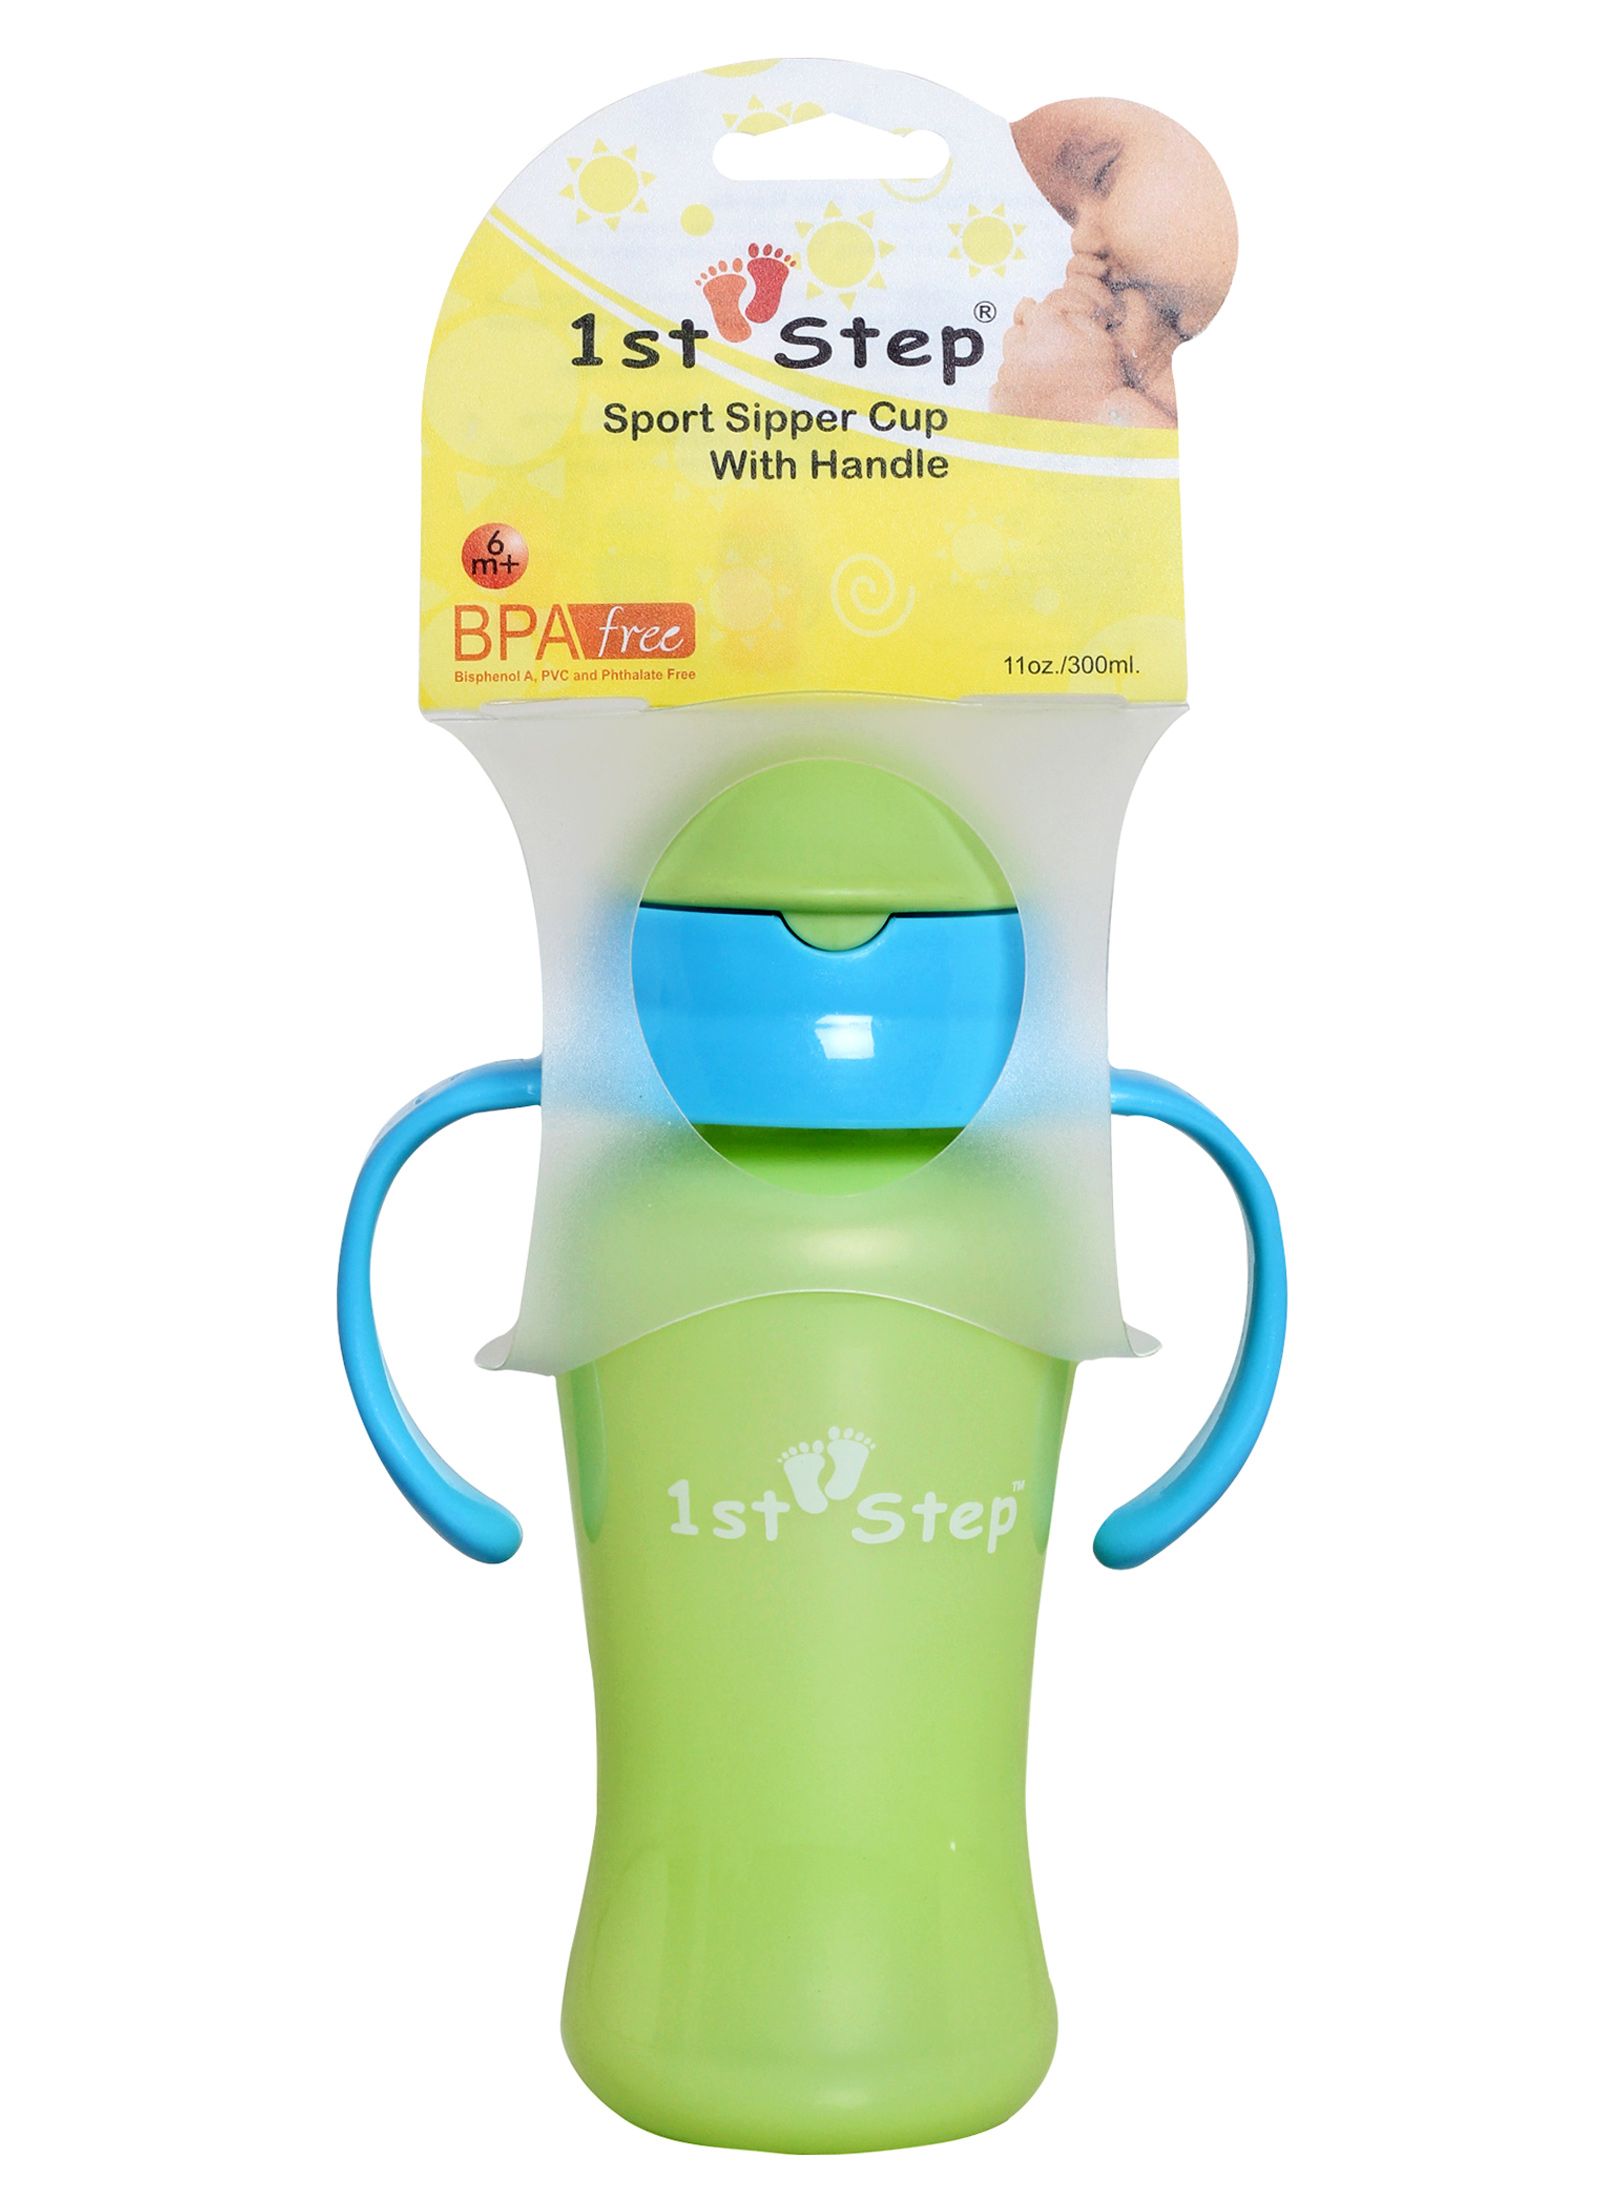 1st Step - Sport Sipper Cup